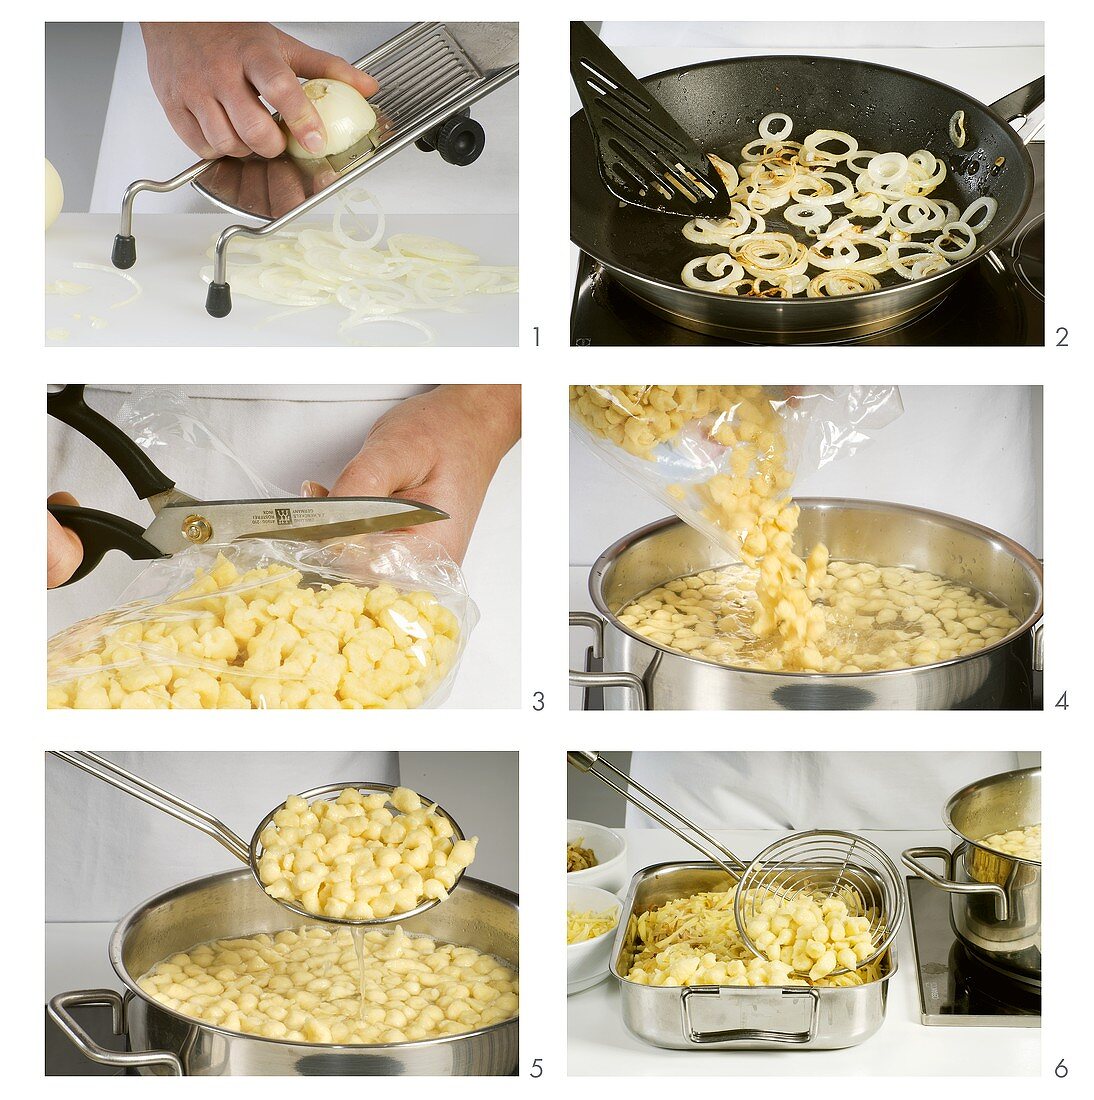 Making cheese spaetzle (noodles) with fried onion